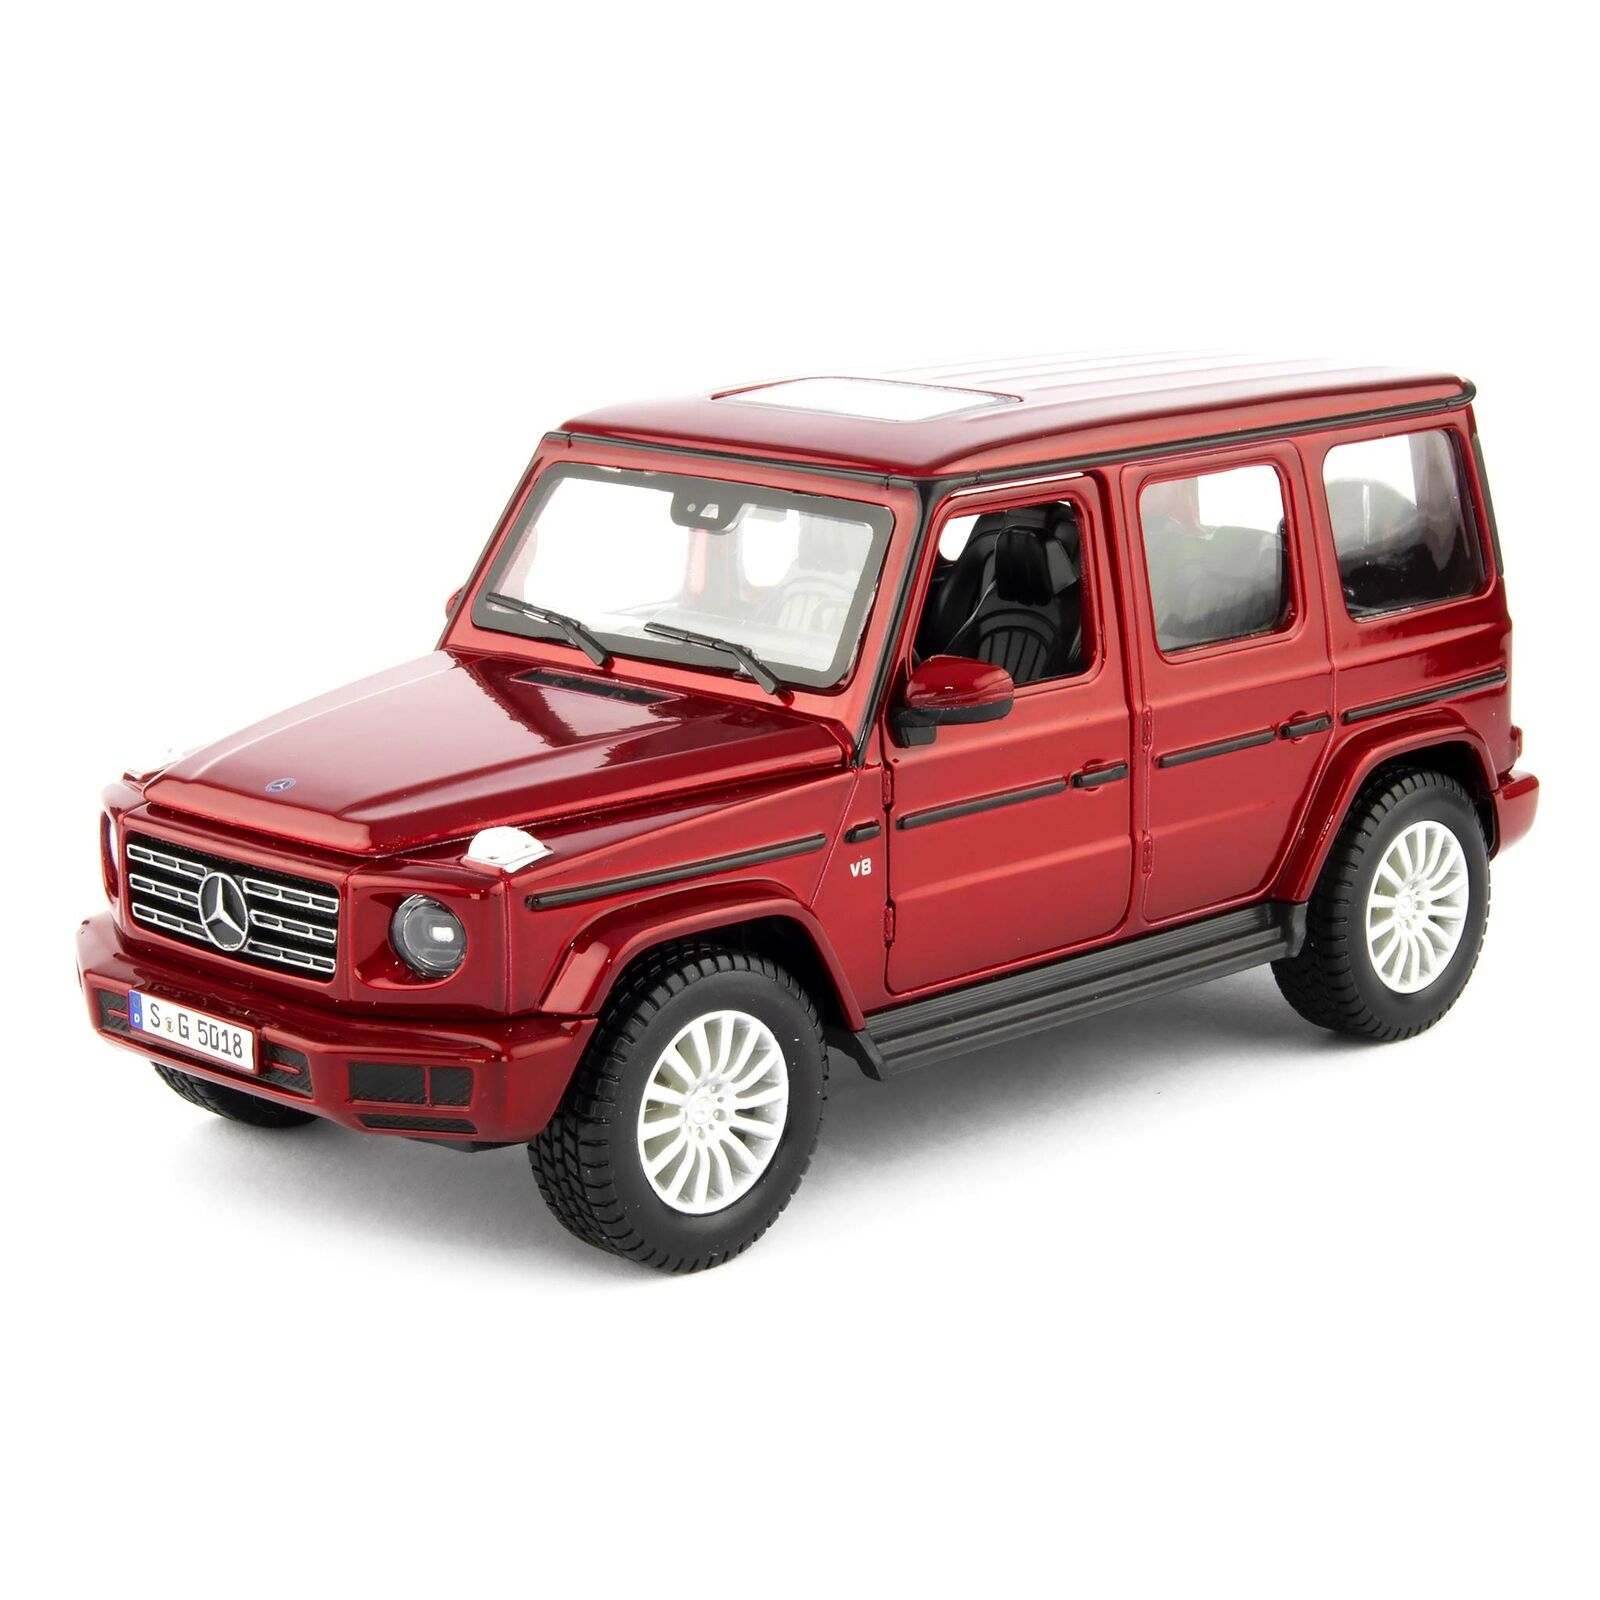 Автомобиль Maisto 2019 Mercedes-Benz красный 31531 maisto 1 25 mercedes benz g class silver alloy car model die casting static precision model collection gift toy tide play